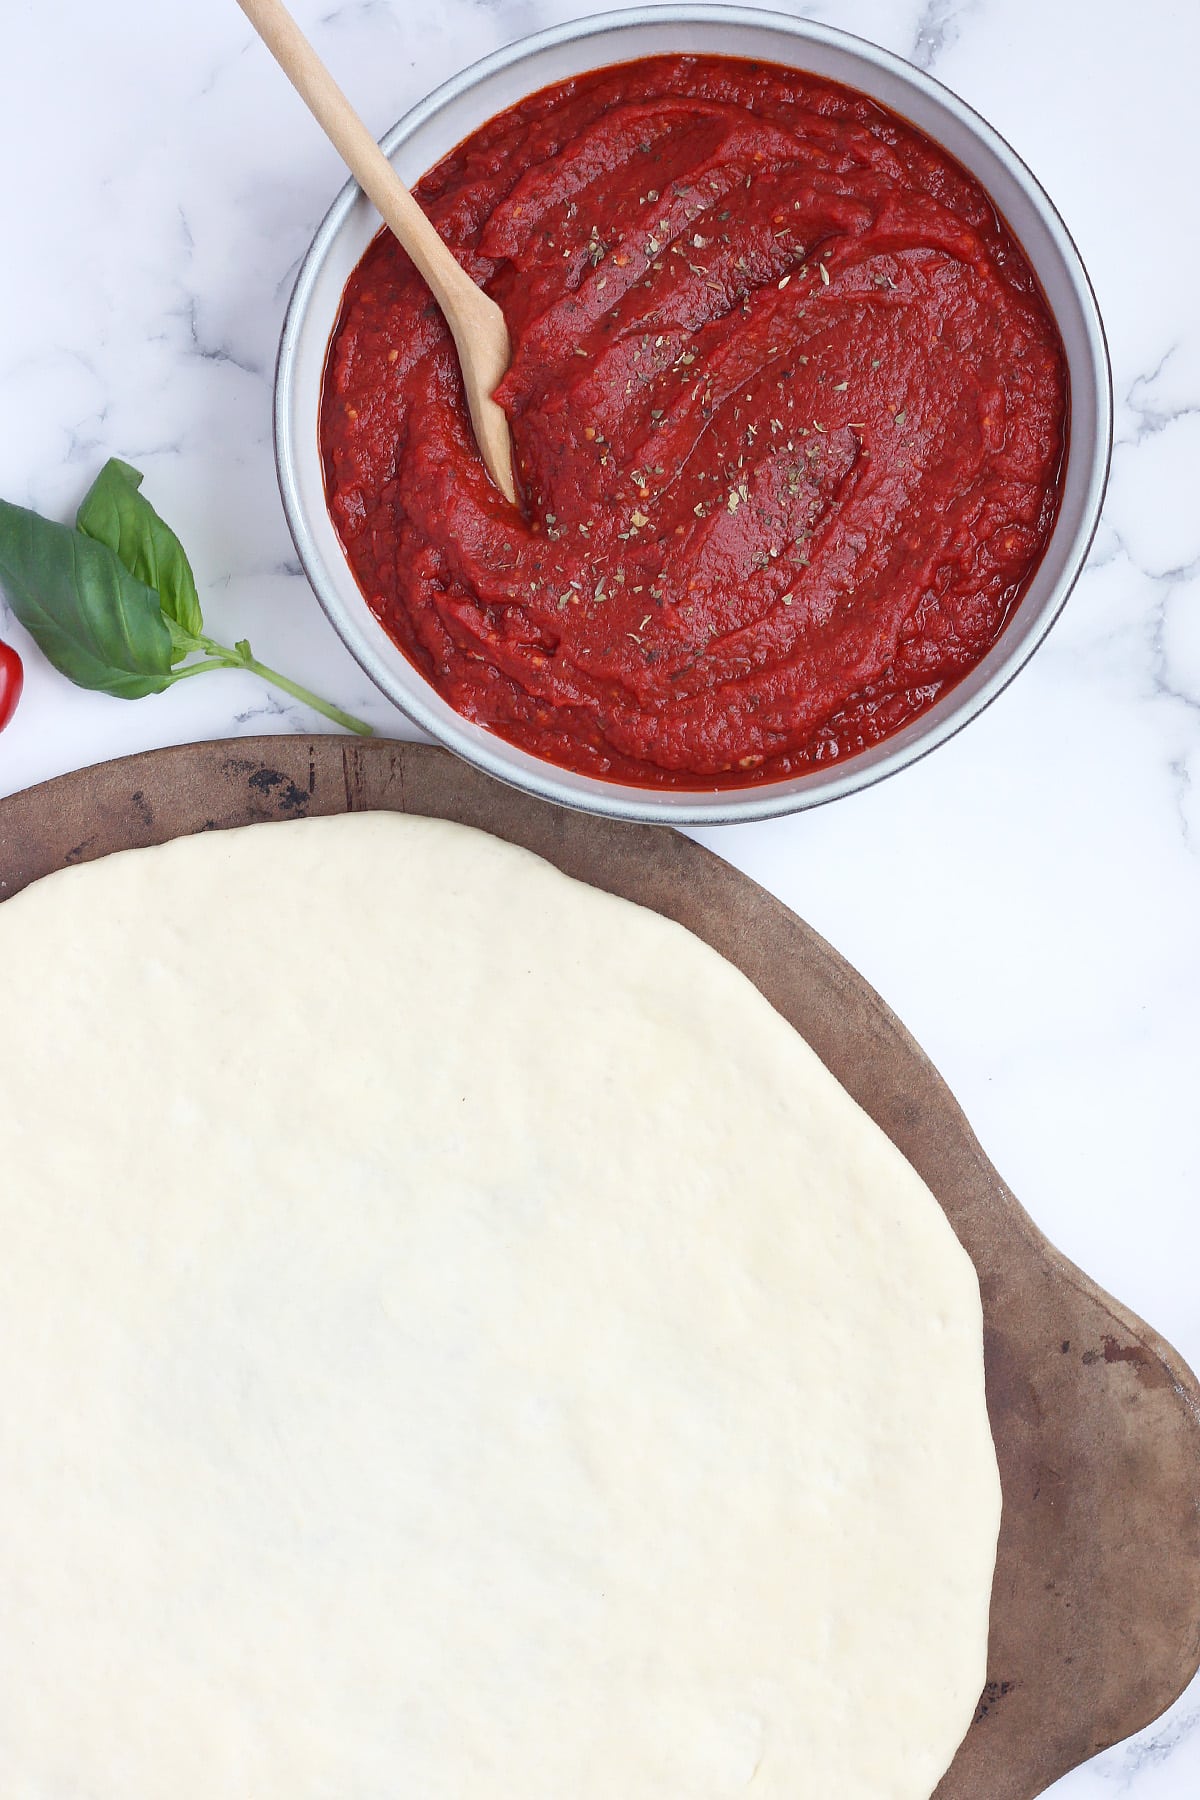 A bowl of pizza sauce near the pizza dough rolled out on a pizza stone.